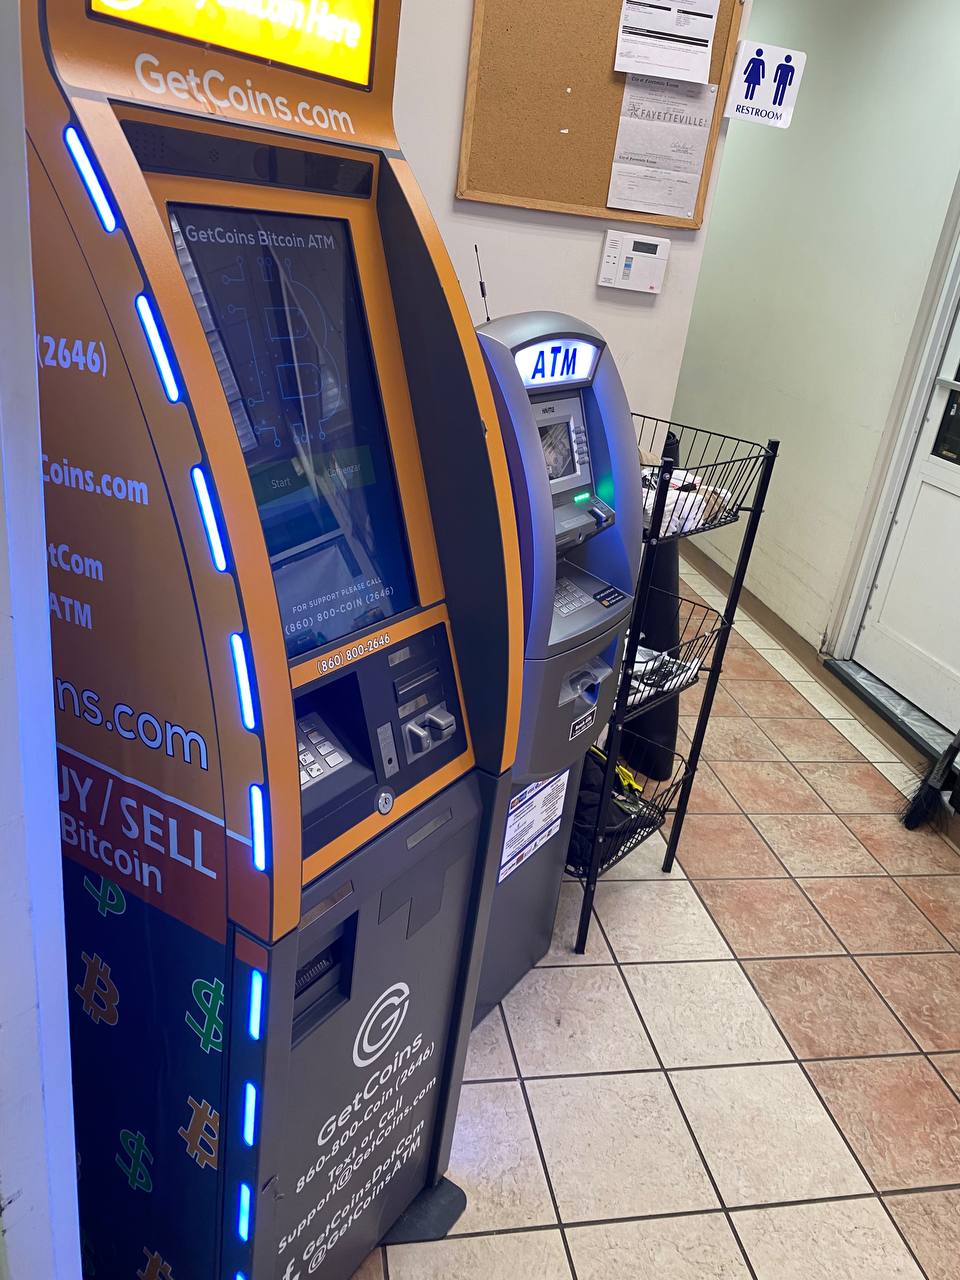 Getcoins - Bitcoin ATM - Inside of BP in Fayetteville, North Carolina